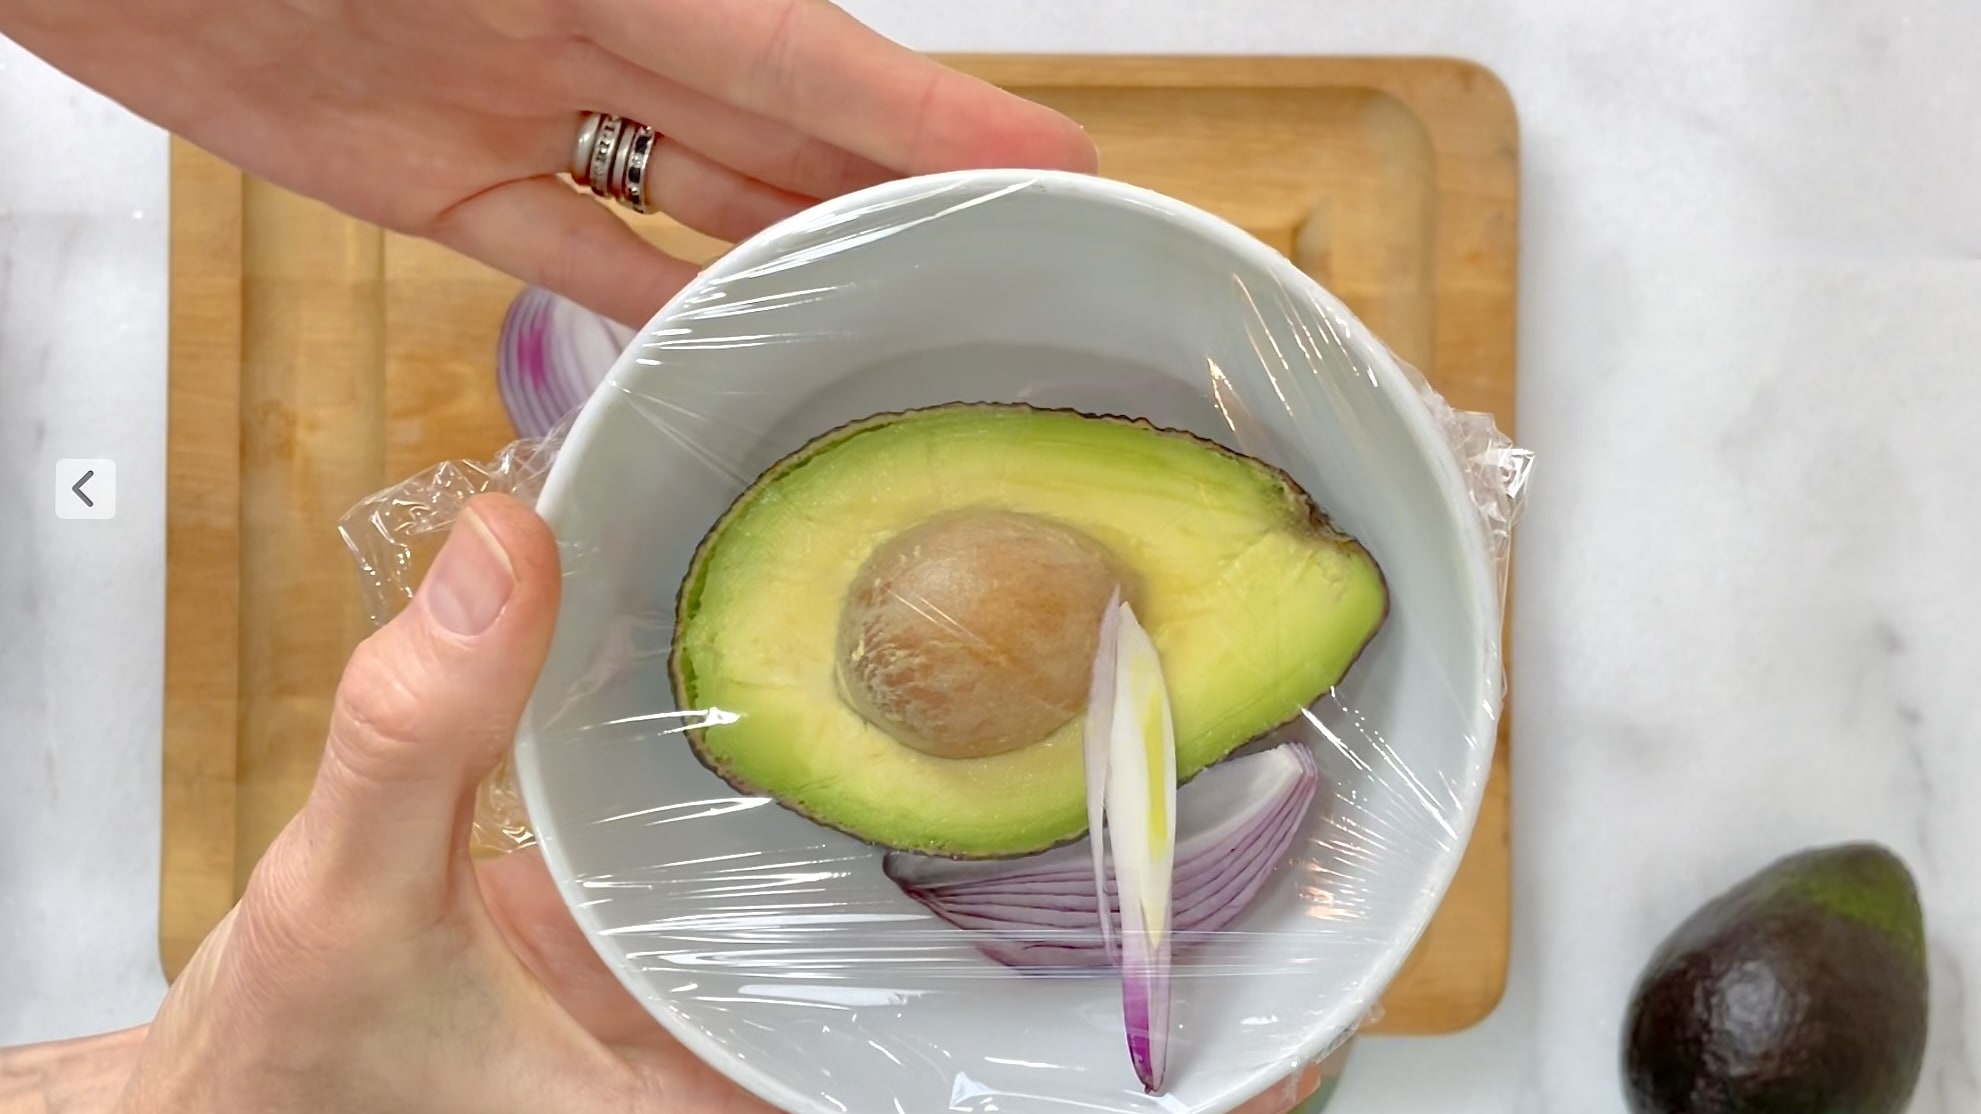 How to Stop an Avocado From Going Brown